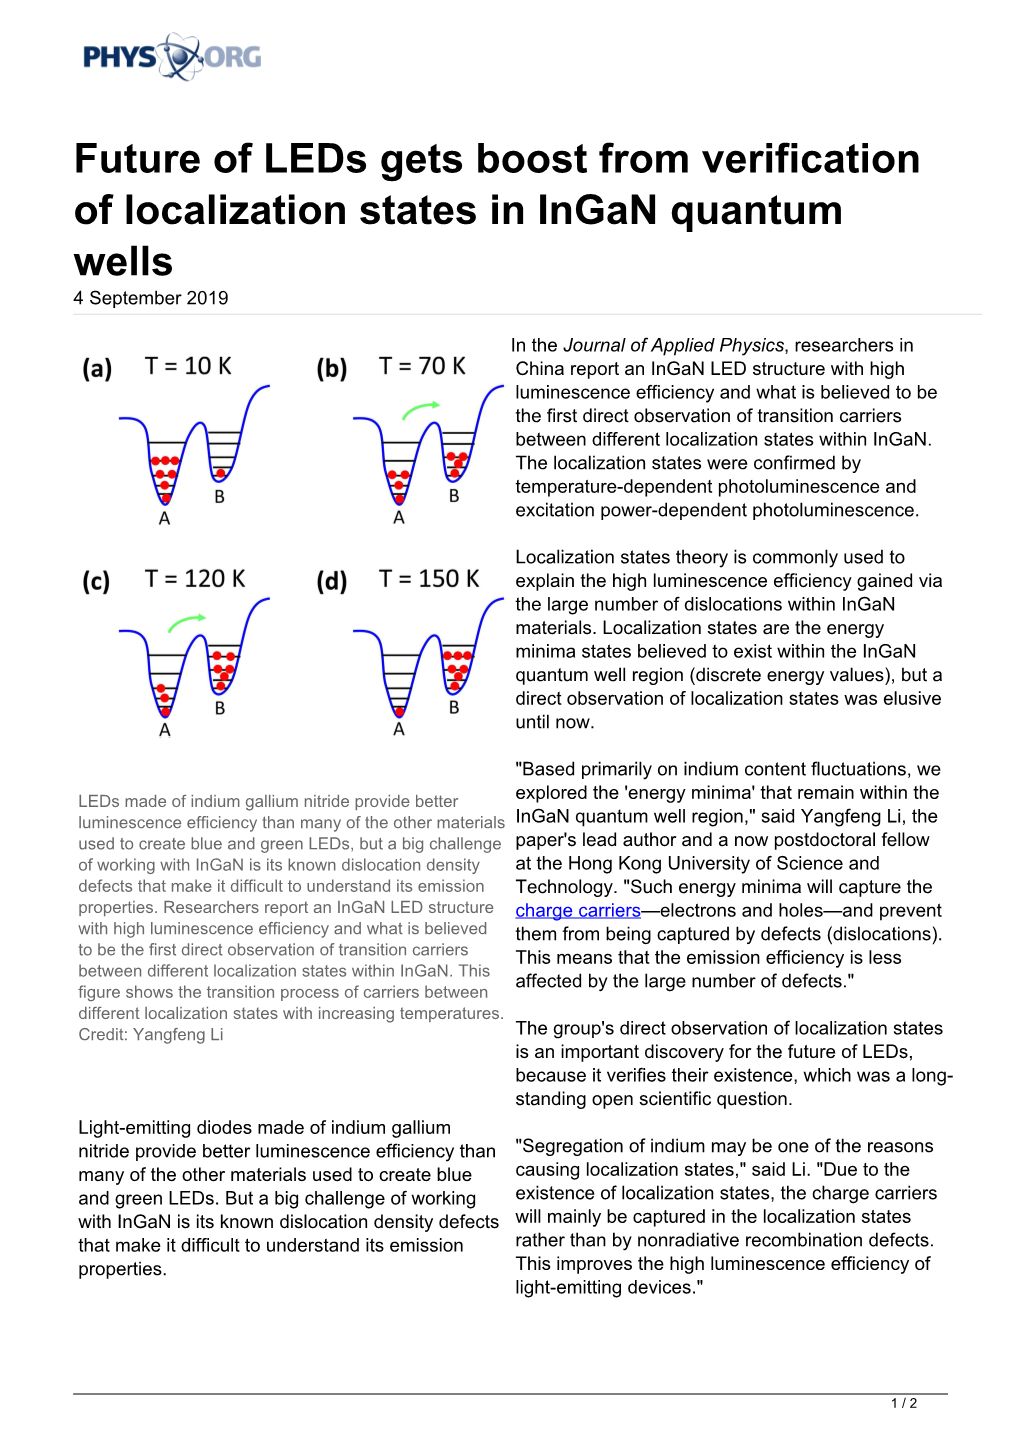 Future of Leds Gets Boost from Verification of Localization States in Ingan Quantum Wells 4 September 2019